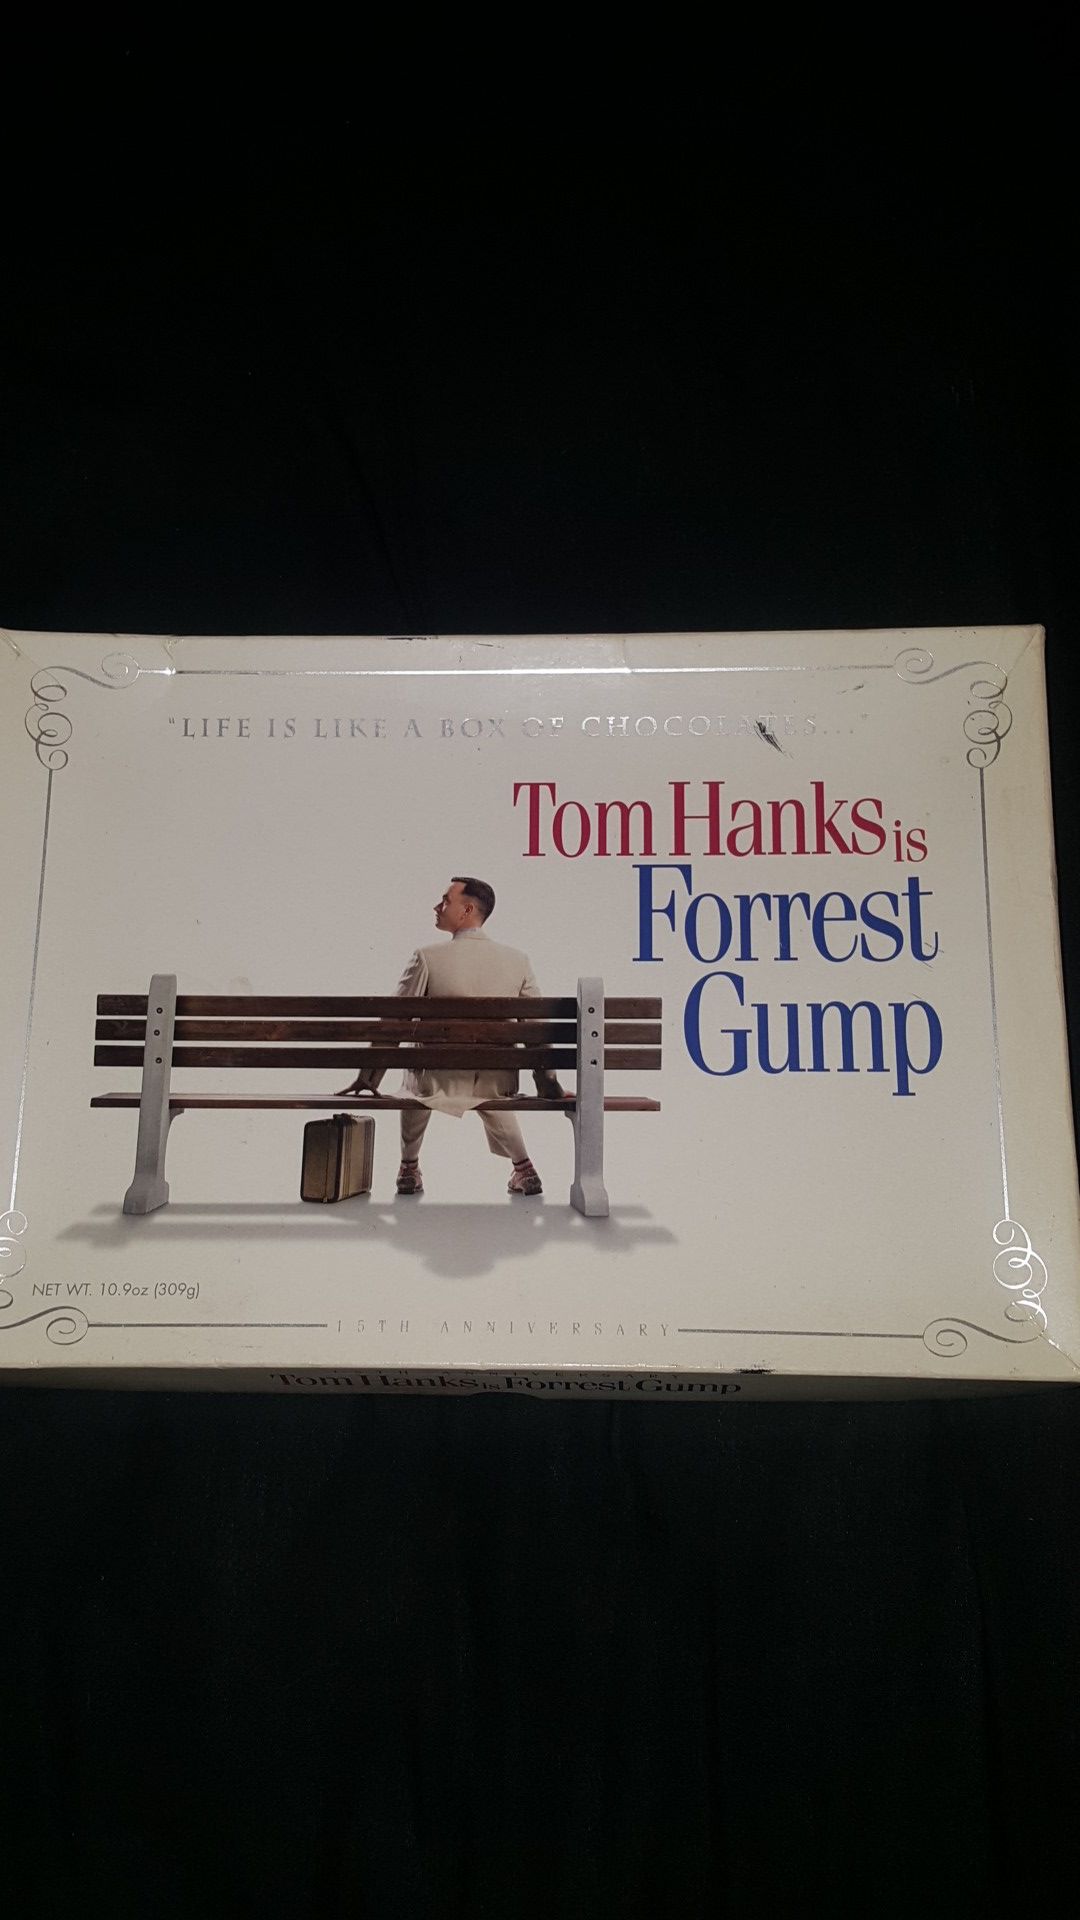 Forrest Gump Dvd "Life is like a box of chocolates" edition